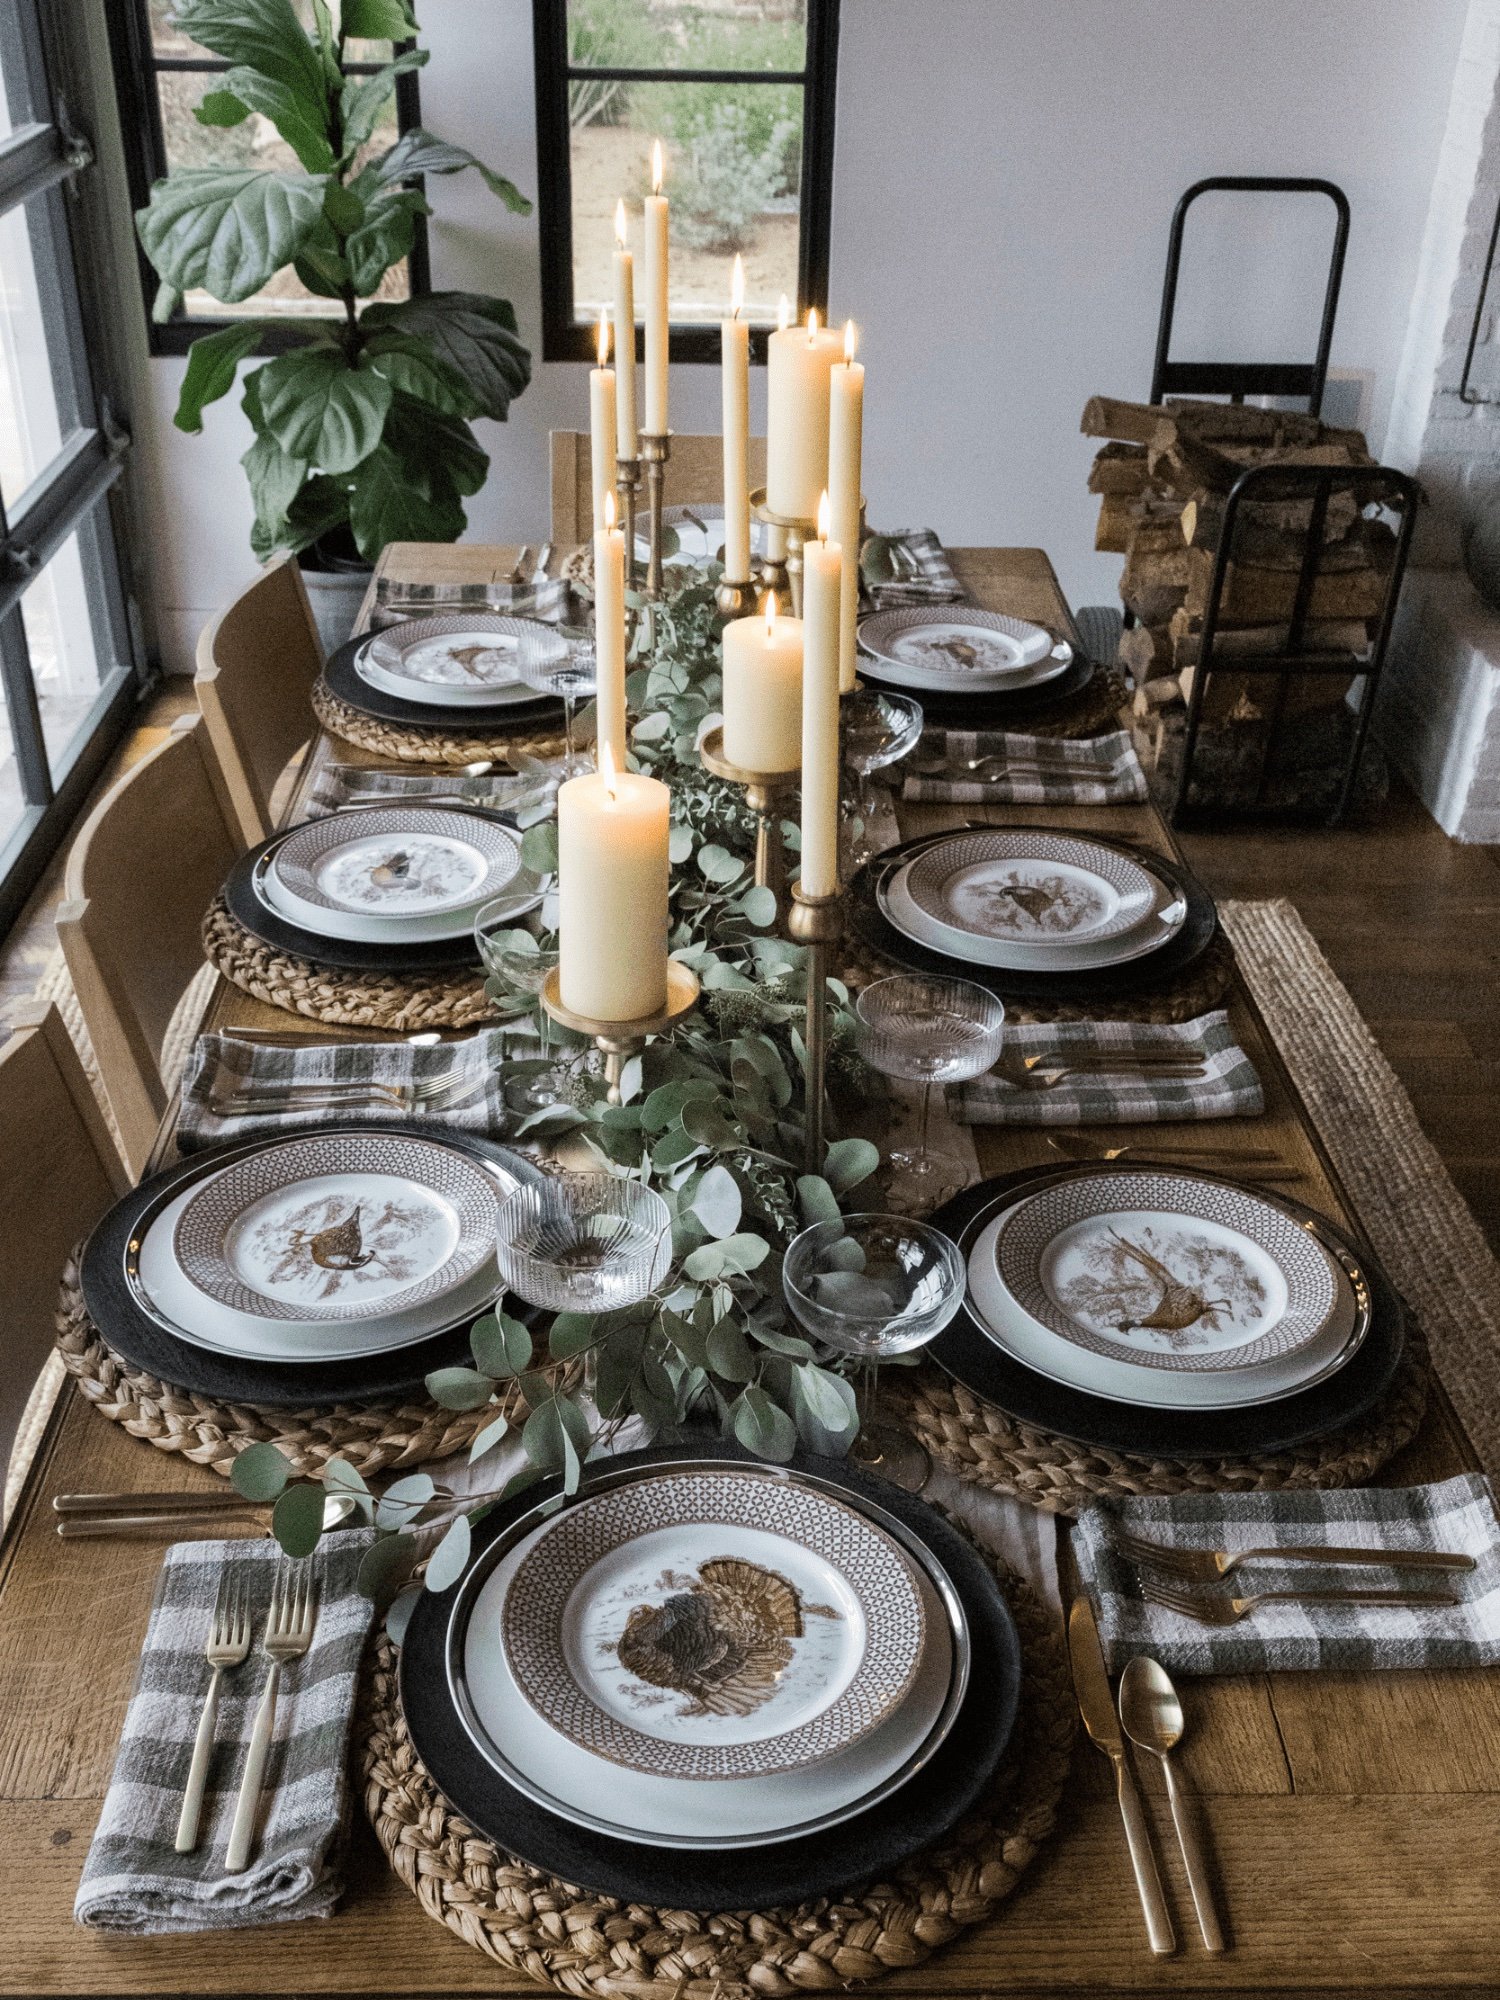 10 Beautiful Rustic Wood Centerpiece Boxes